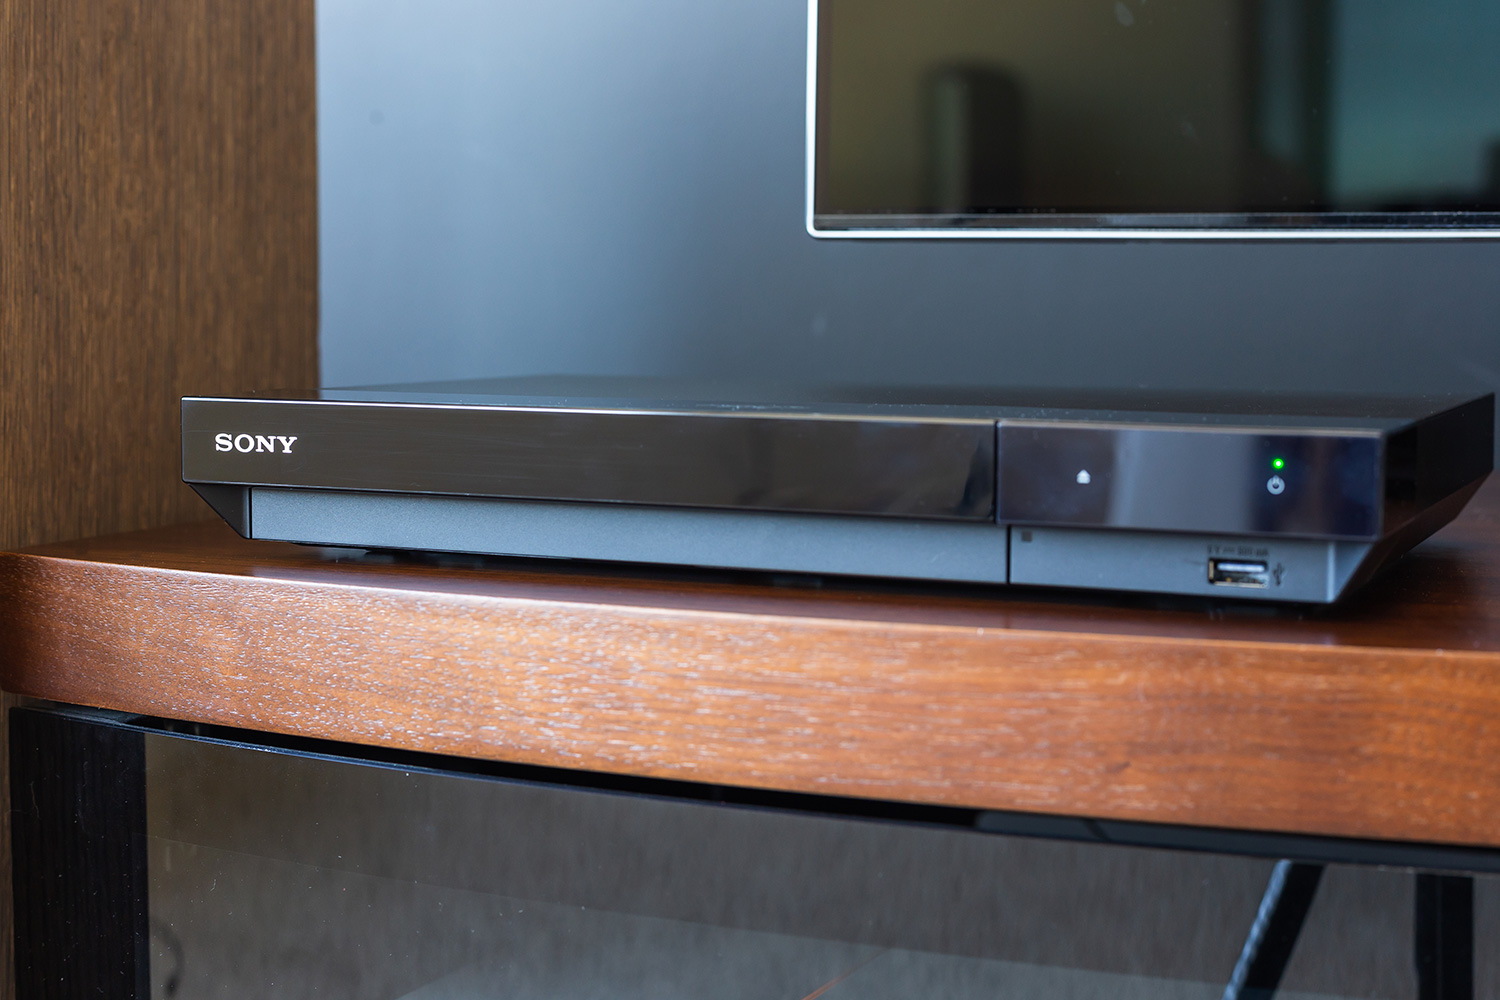 Sony UBP-X700 Ultra HD Blu-ray player review: Quick, compatible, smart